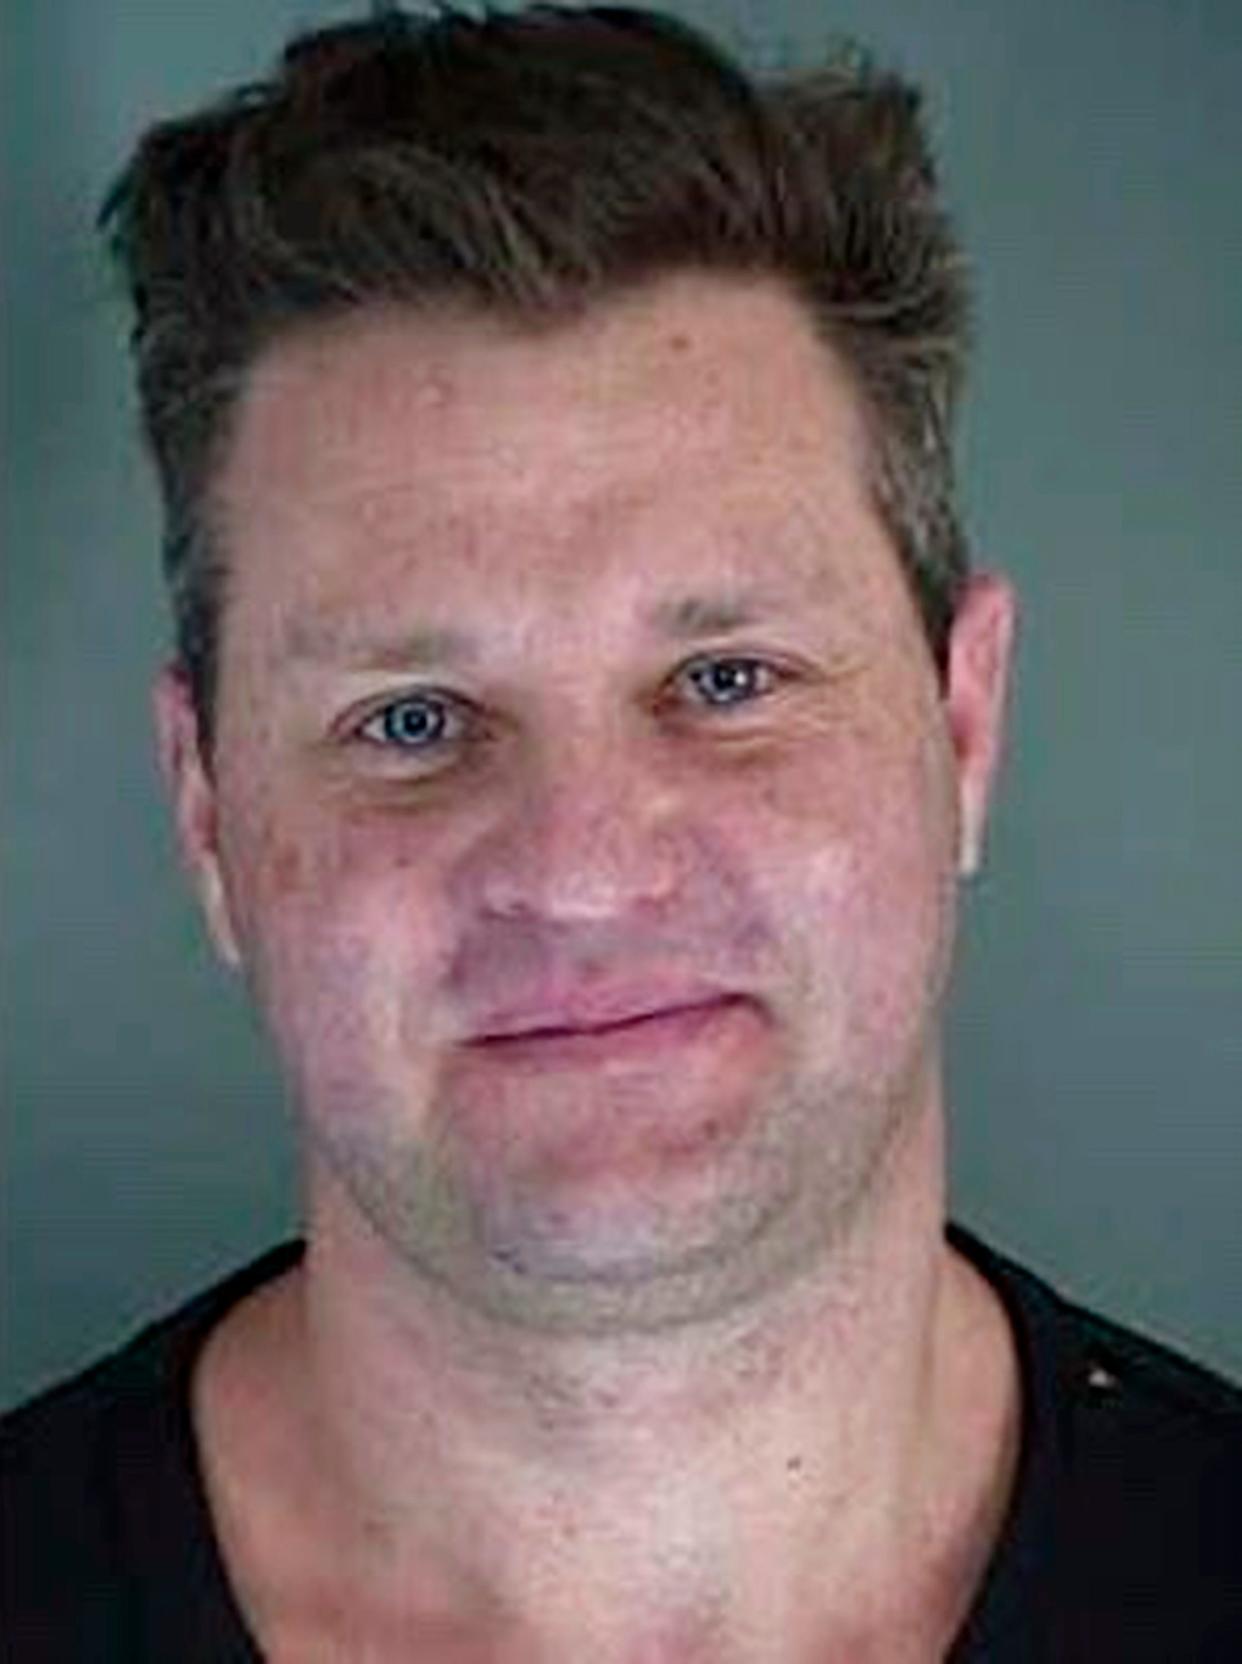 Zachery Ty Bryan was arrested in October 2020 on charges related to domestic violence.